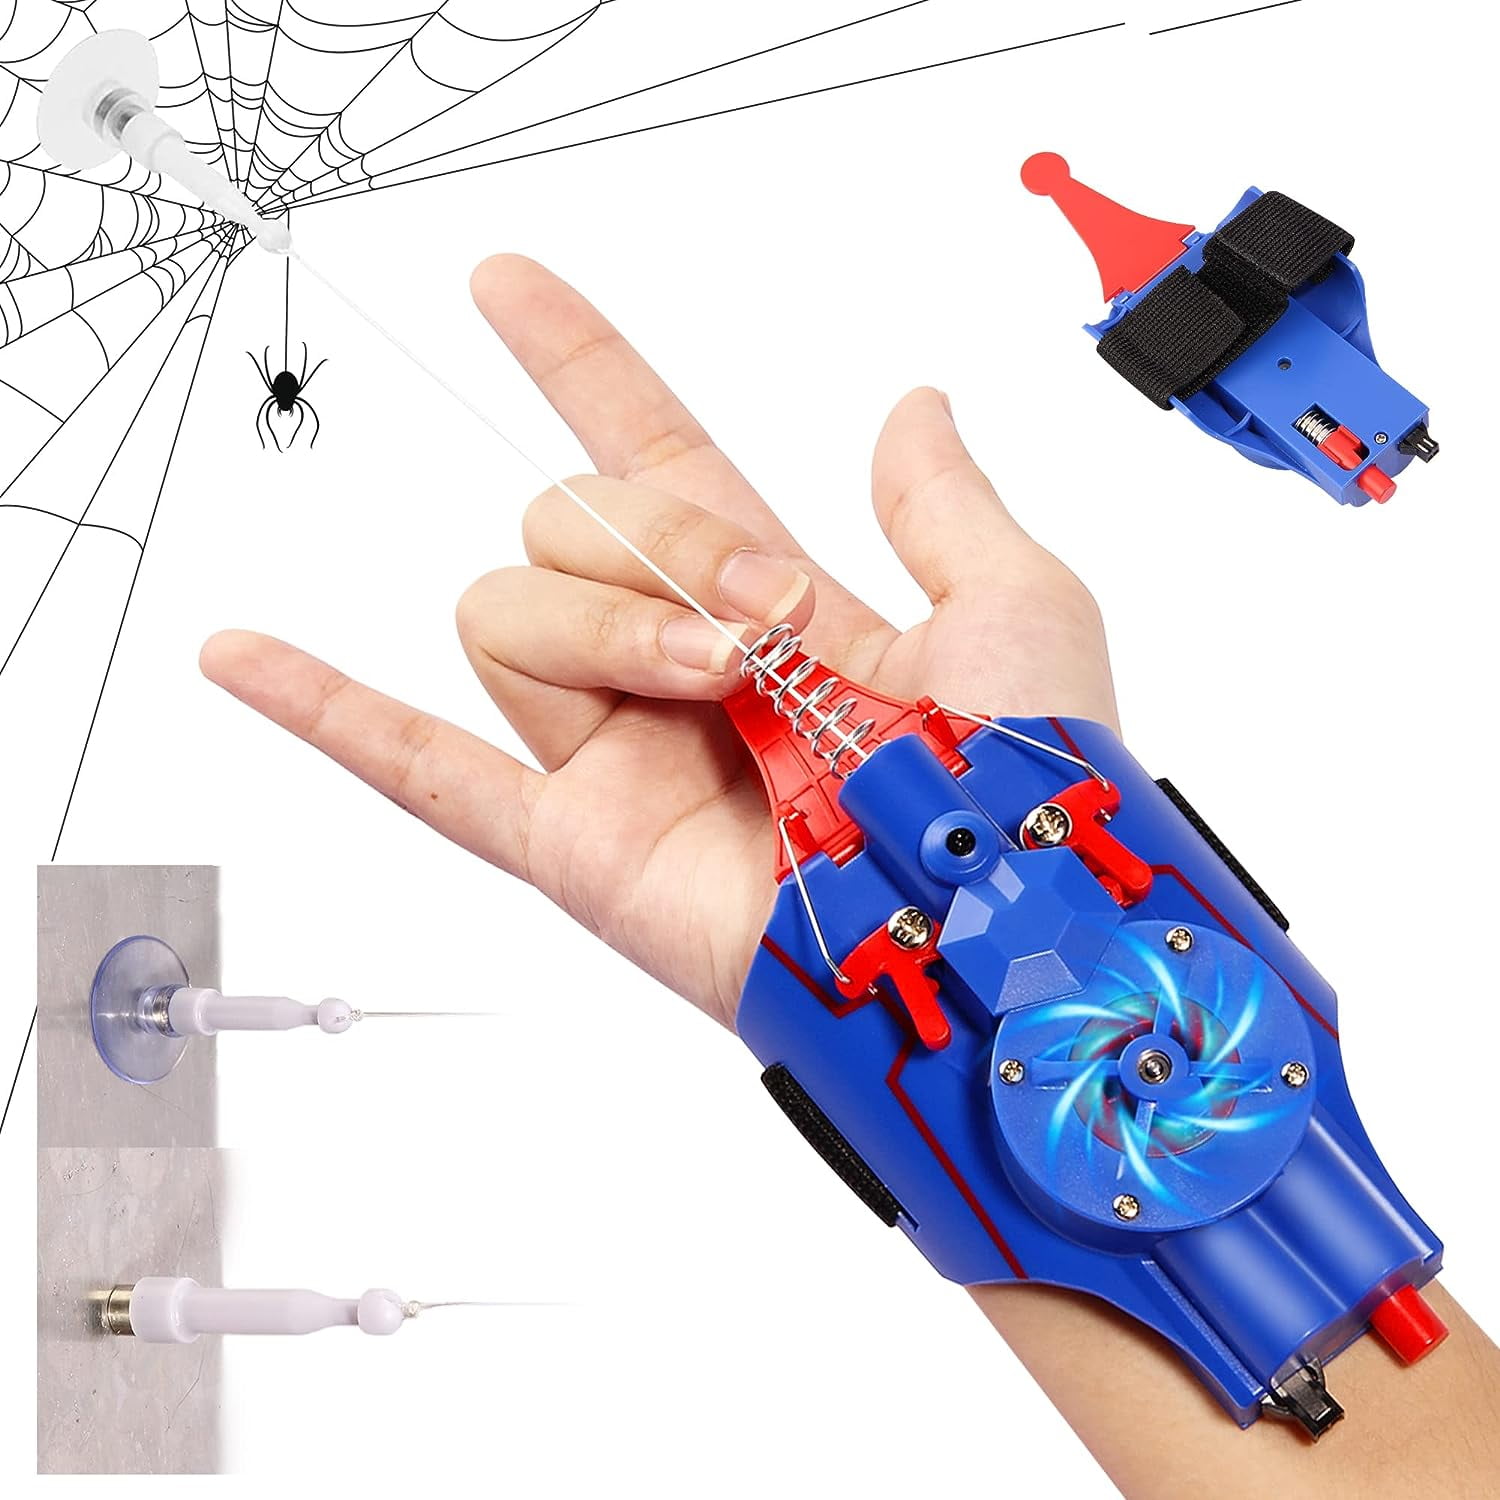 Web Shooter Launcher String Toy, [Electric Reel-in] Cool Gadgets Spider Web  Shooters Real Silk [9.8ft Range] Superhero Role-Play Cool Stuff Fun Toys